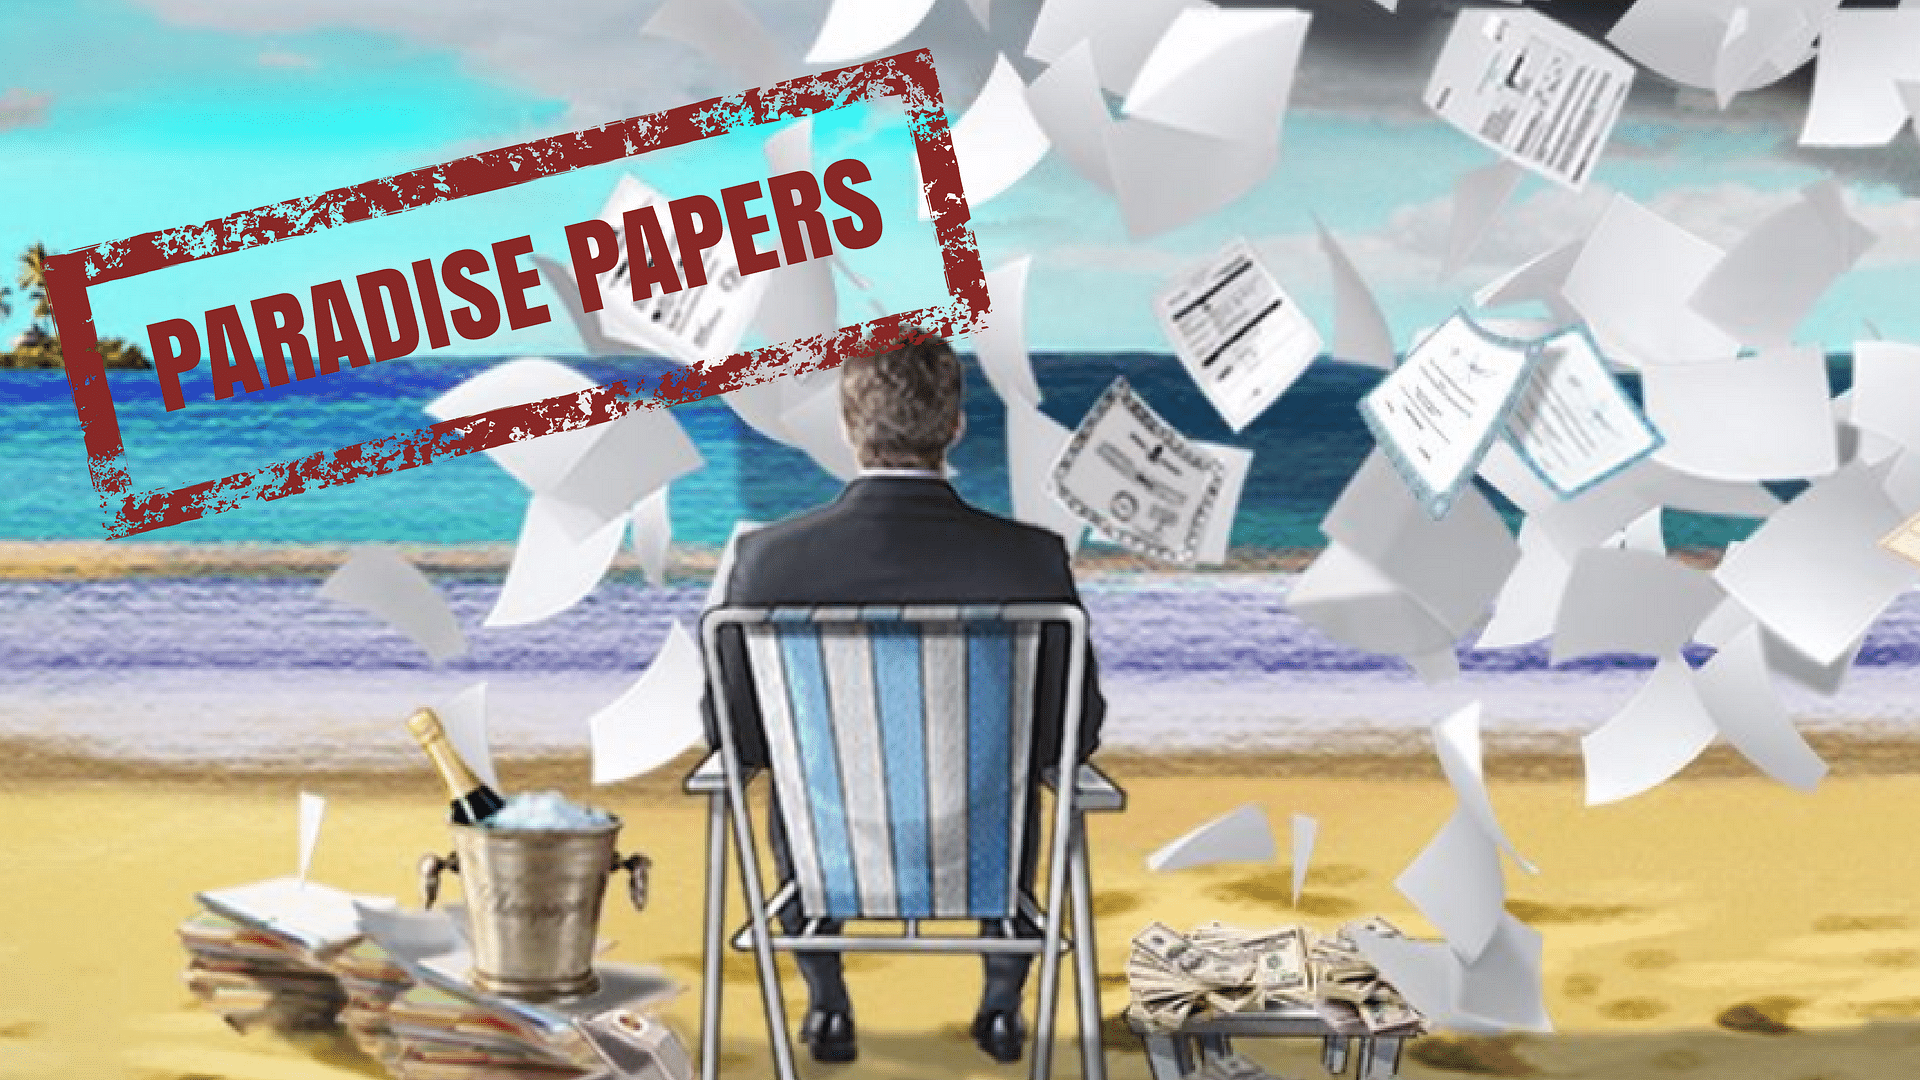 Paradise Papers reveal trail of Indian corporates involved in offshore tax havens.